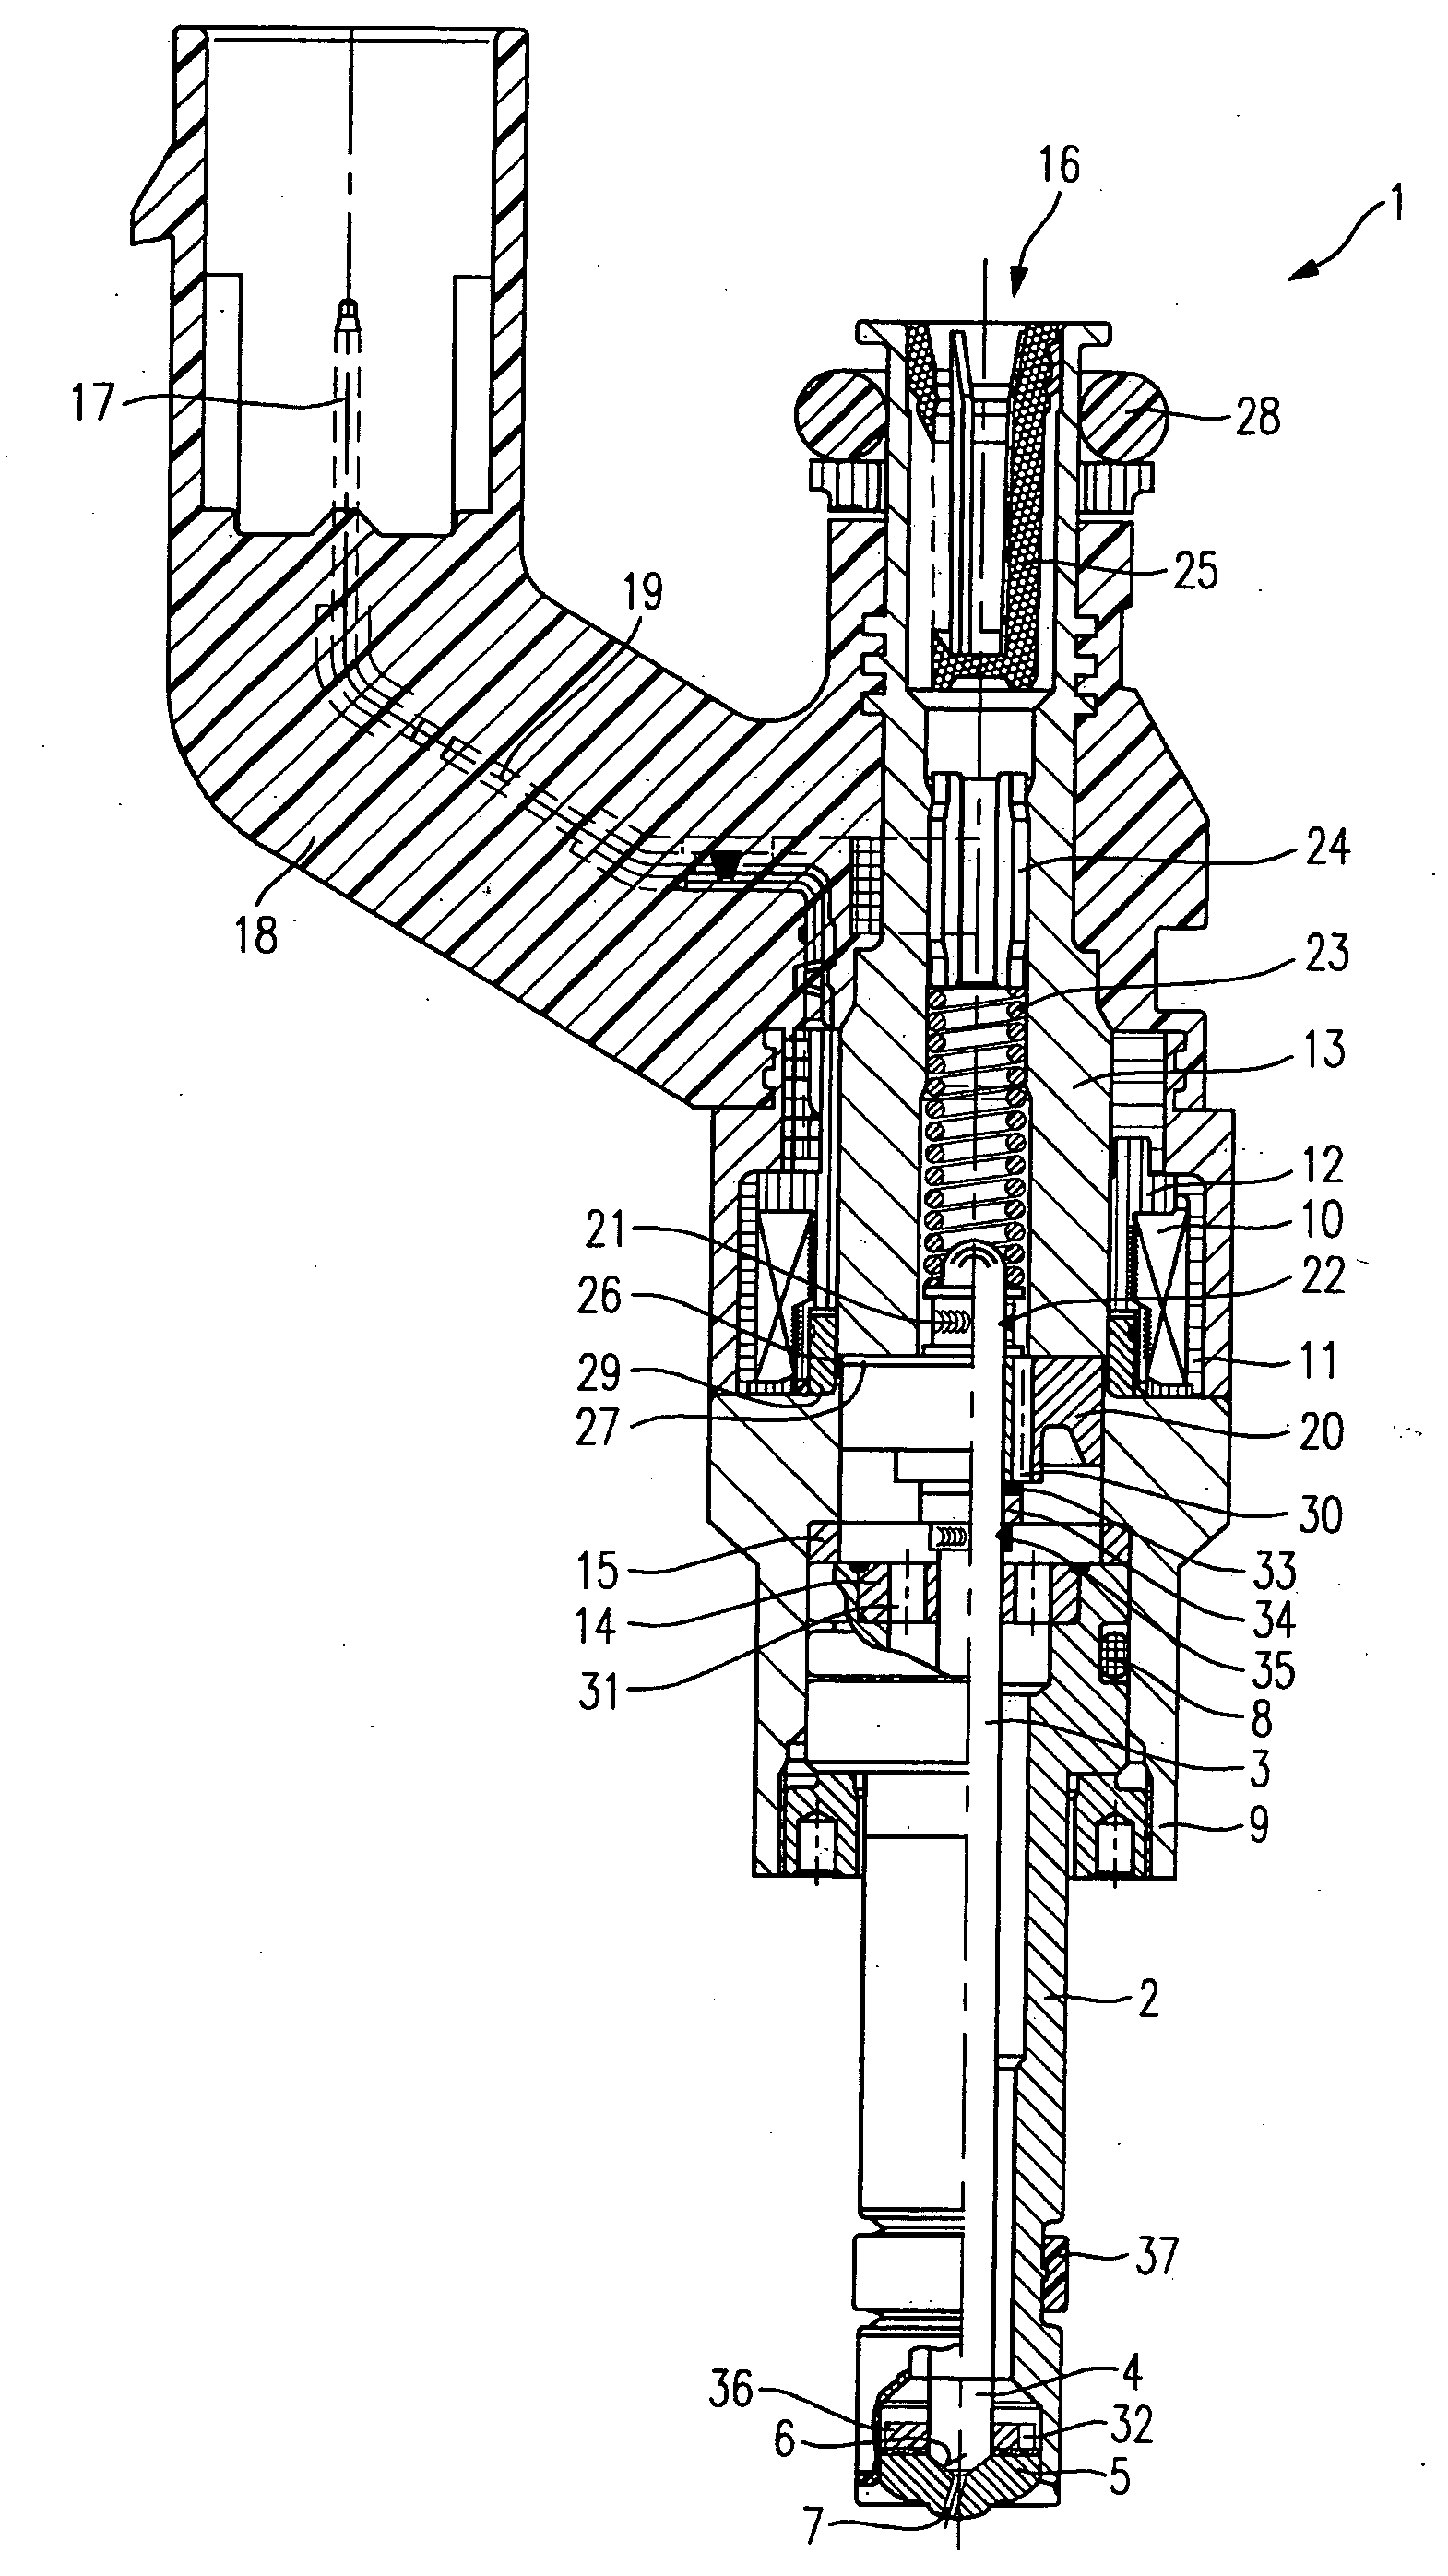 Fuel Injector Having an Integrated Ignition Device